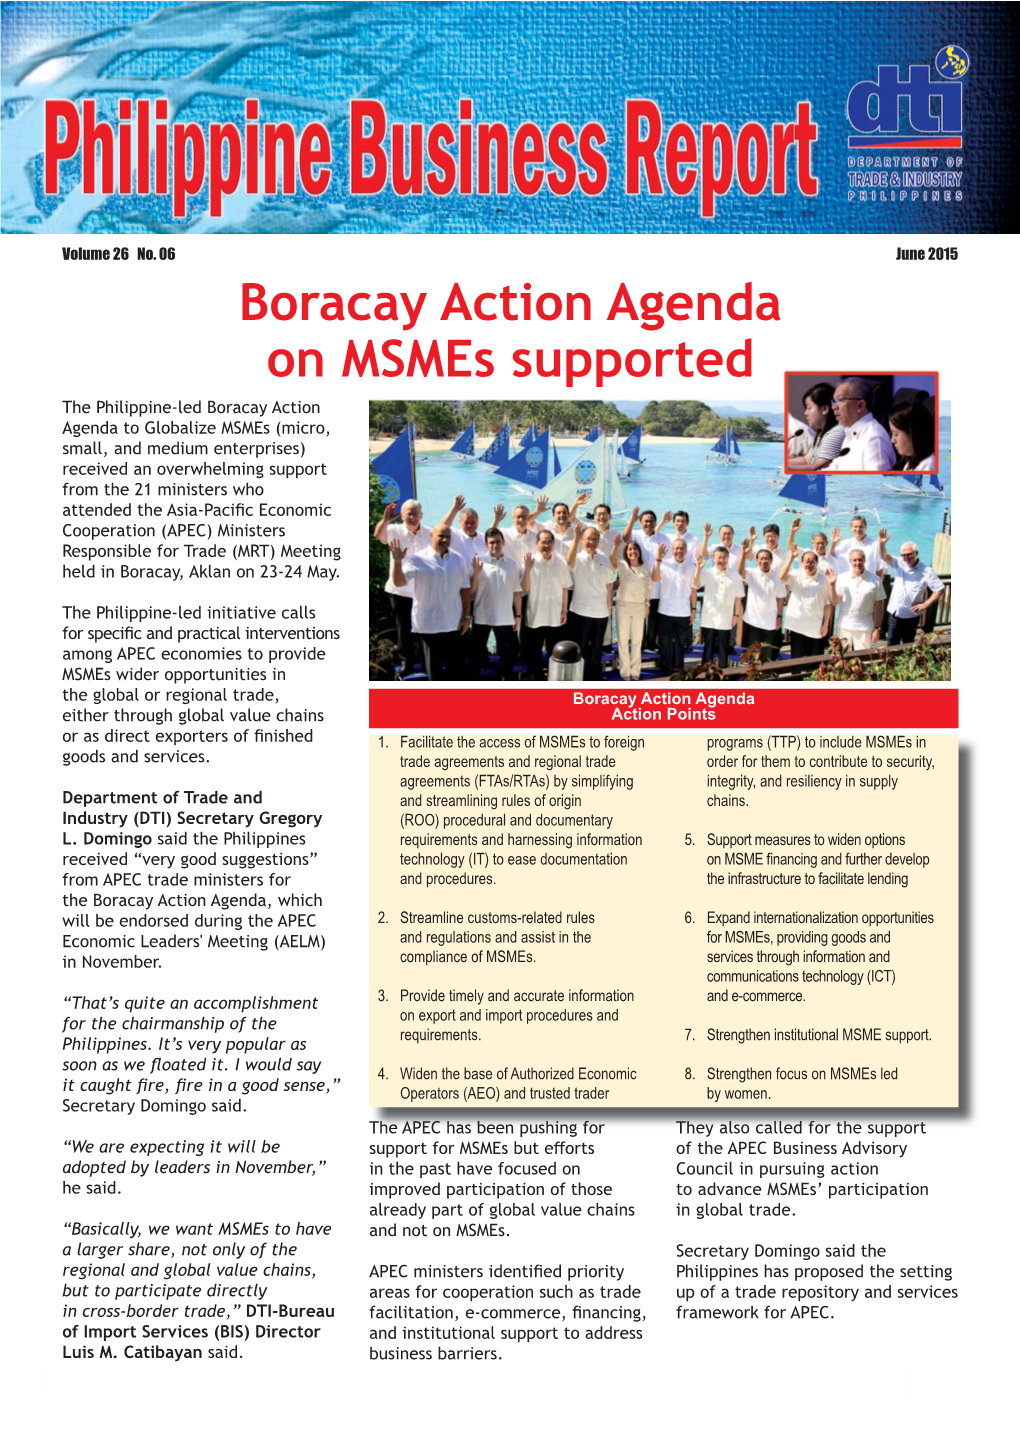 Boracay Action Agenda on Msmes Supported